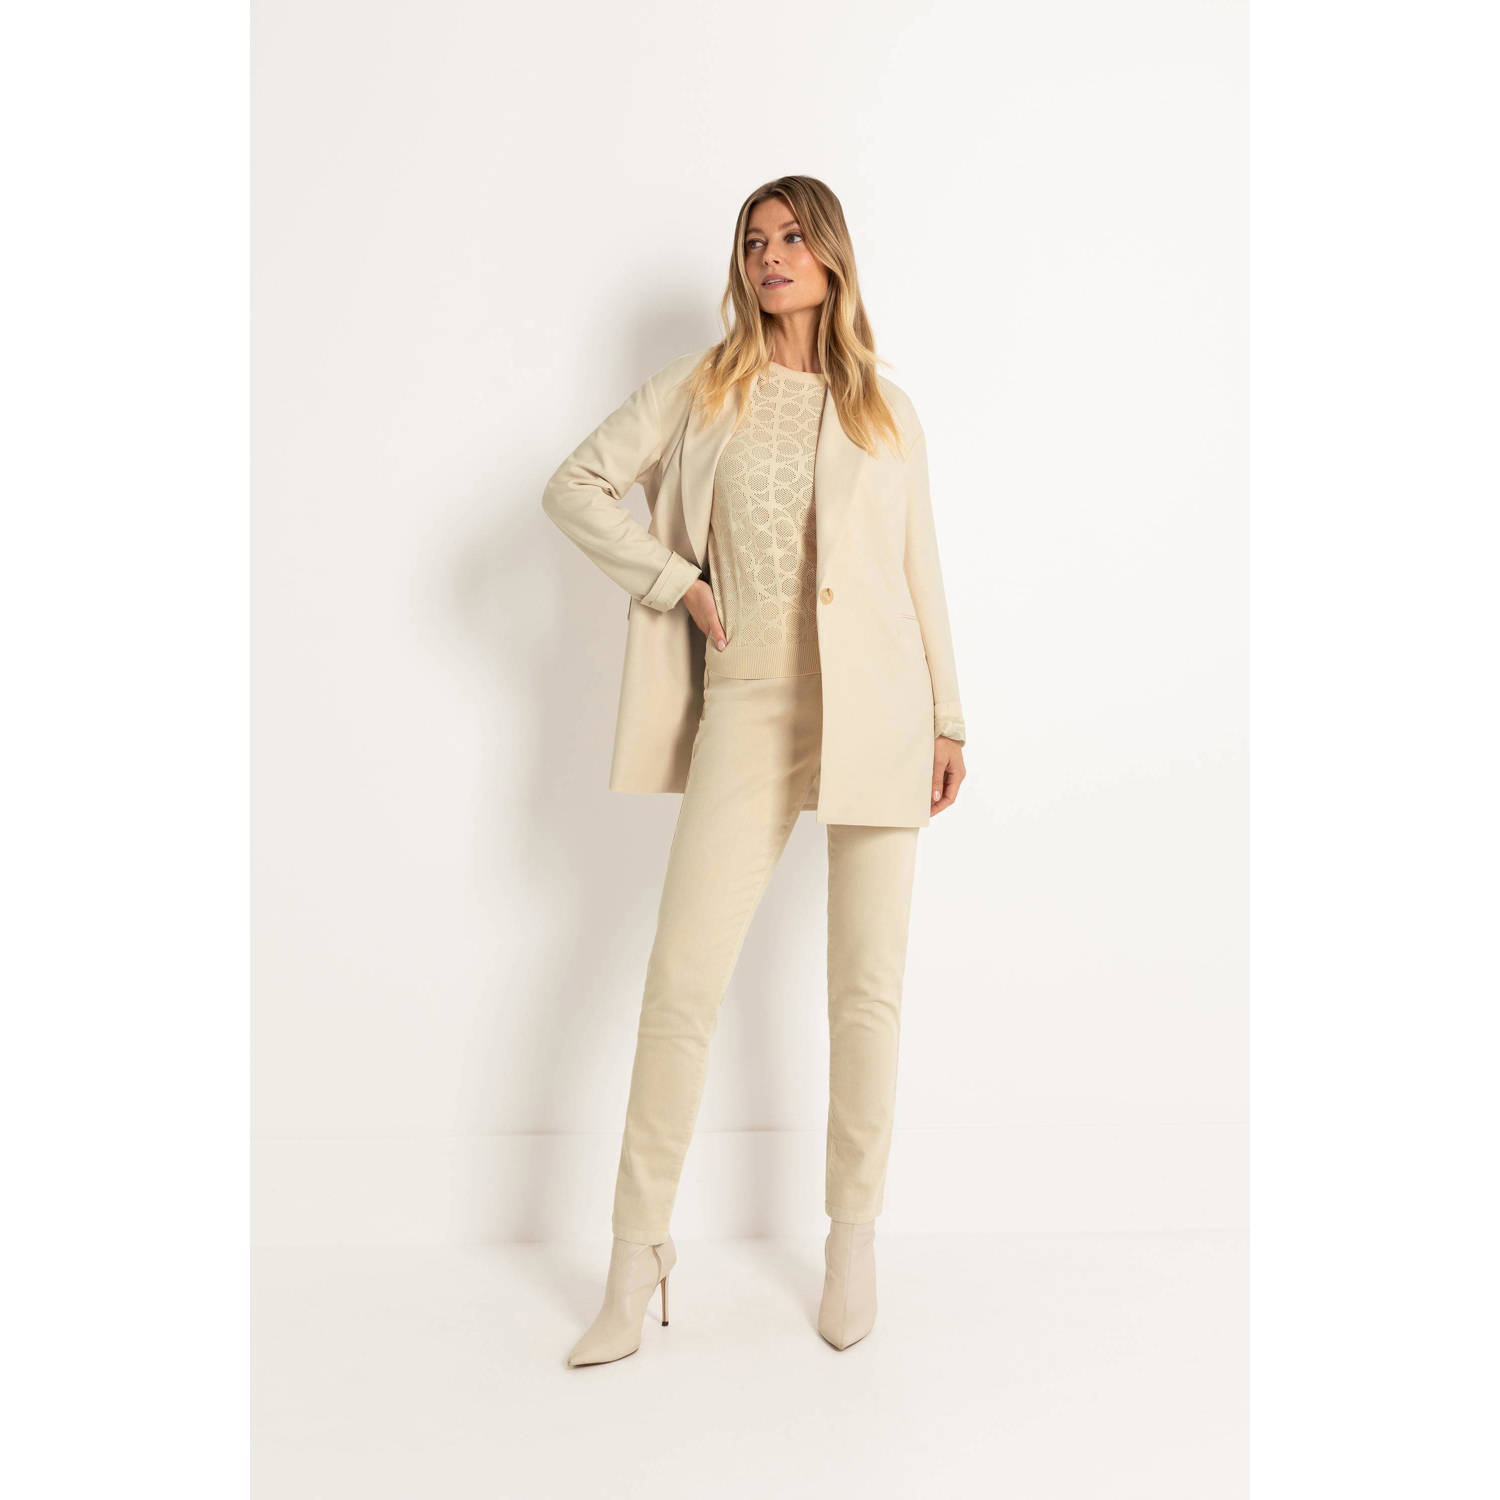 Claudia Sträter skinny jeans beige